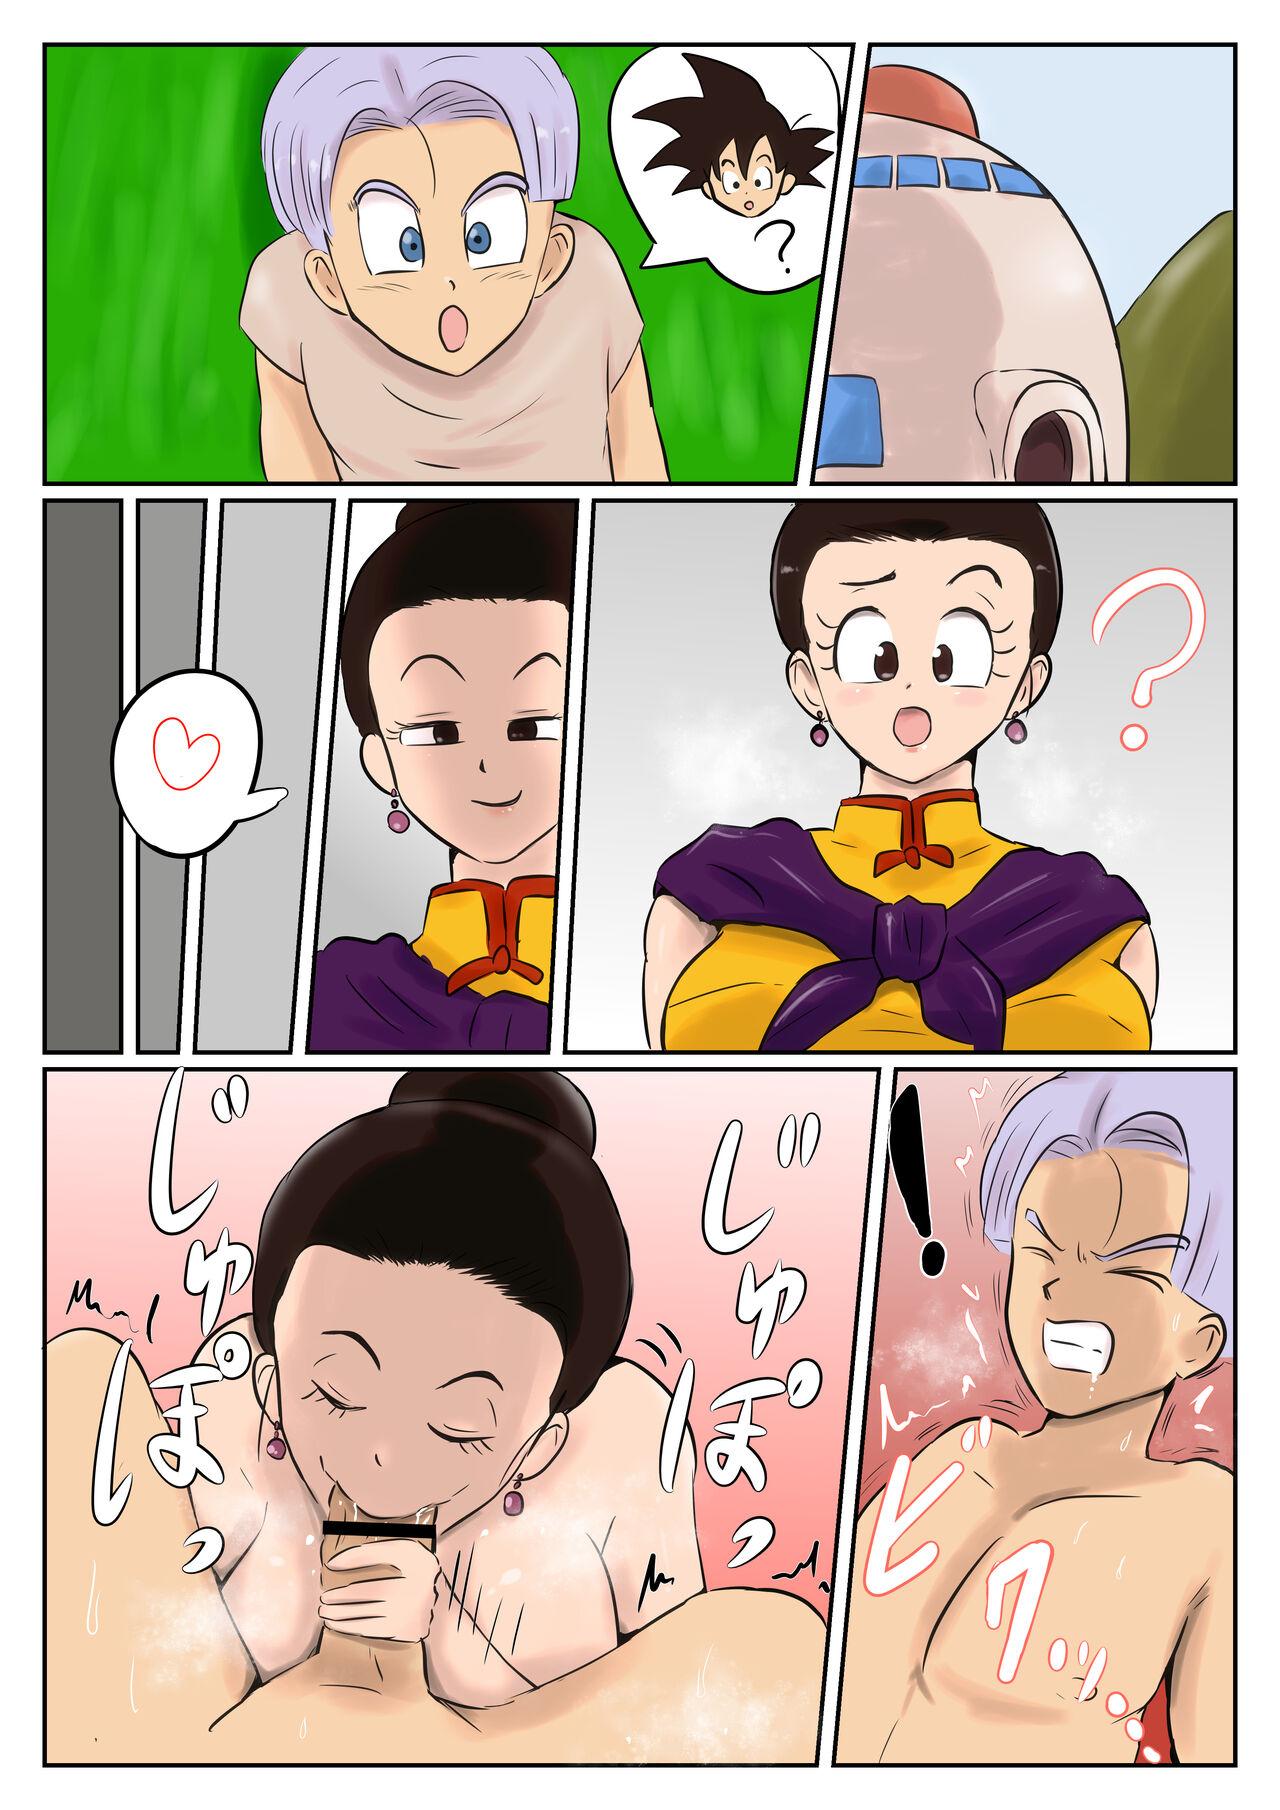 Kissing Trunks x Chichi - Dragon ball z Sexy Girl Sex - Picture 1